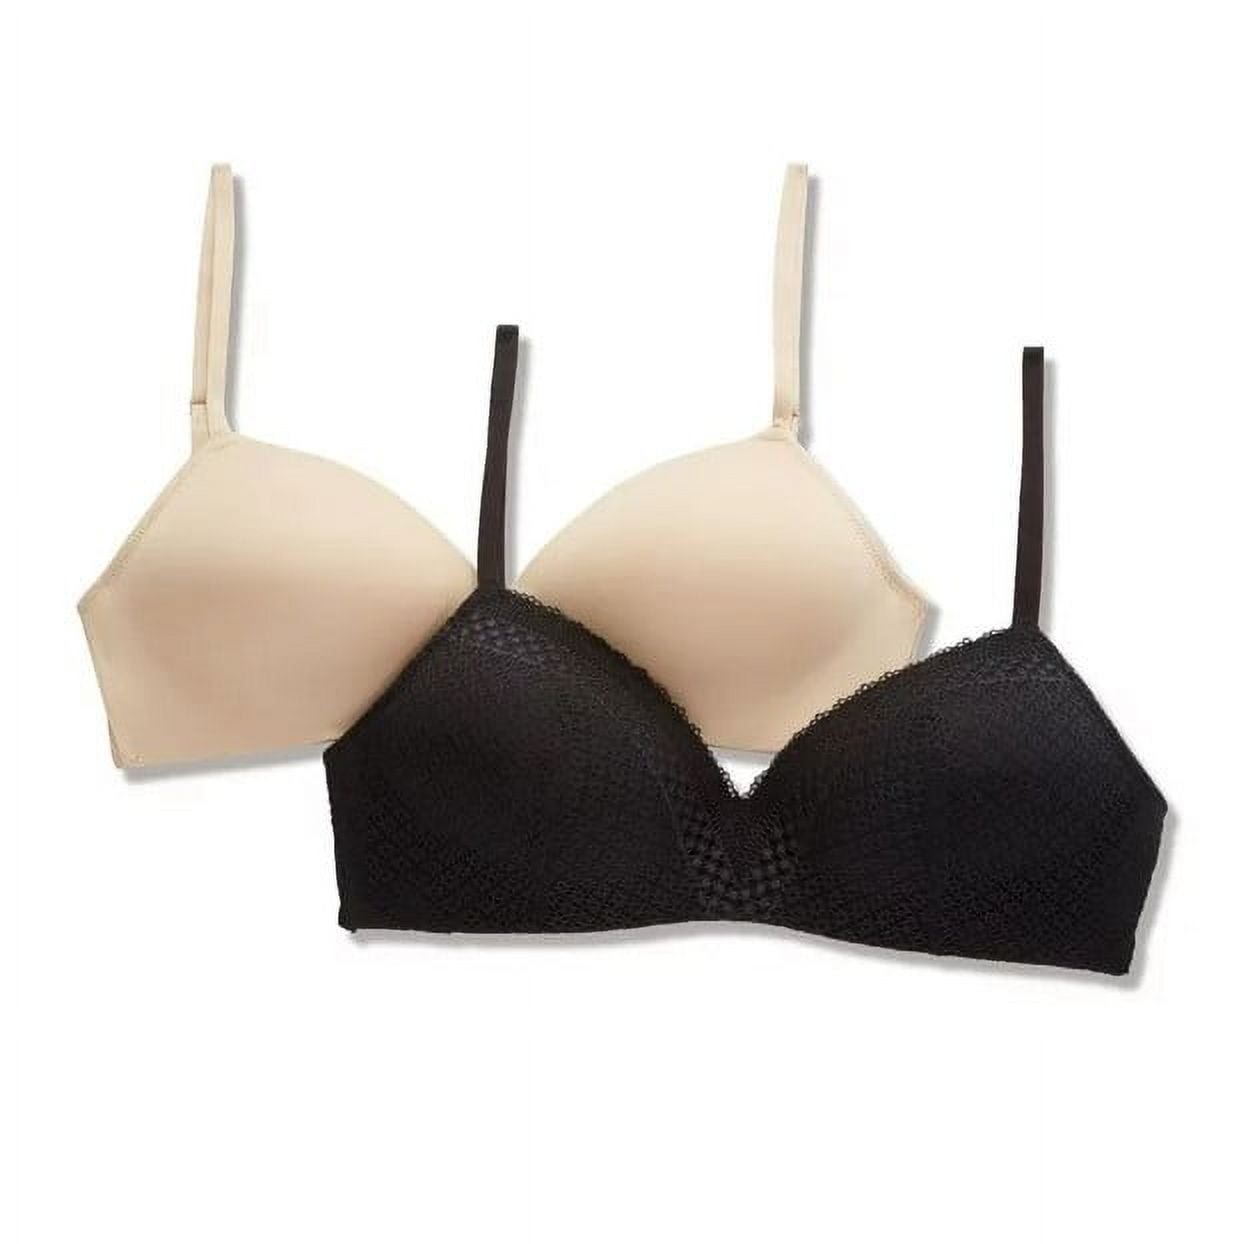 Desperate for help to find bra cups of this shape! : r/sewhelp